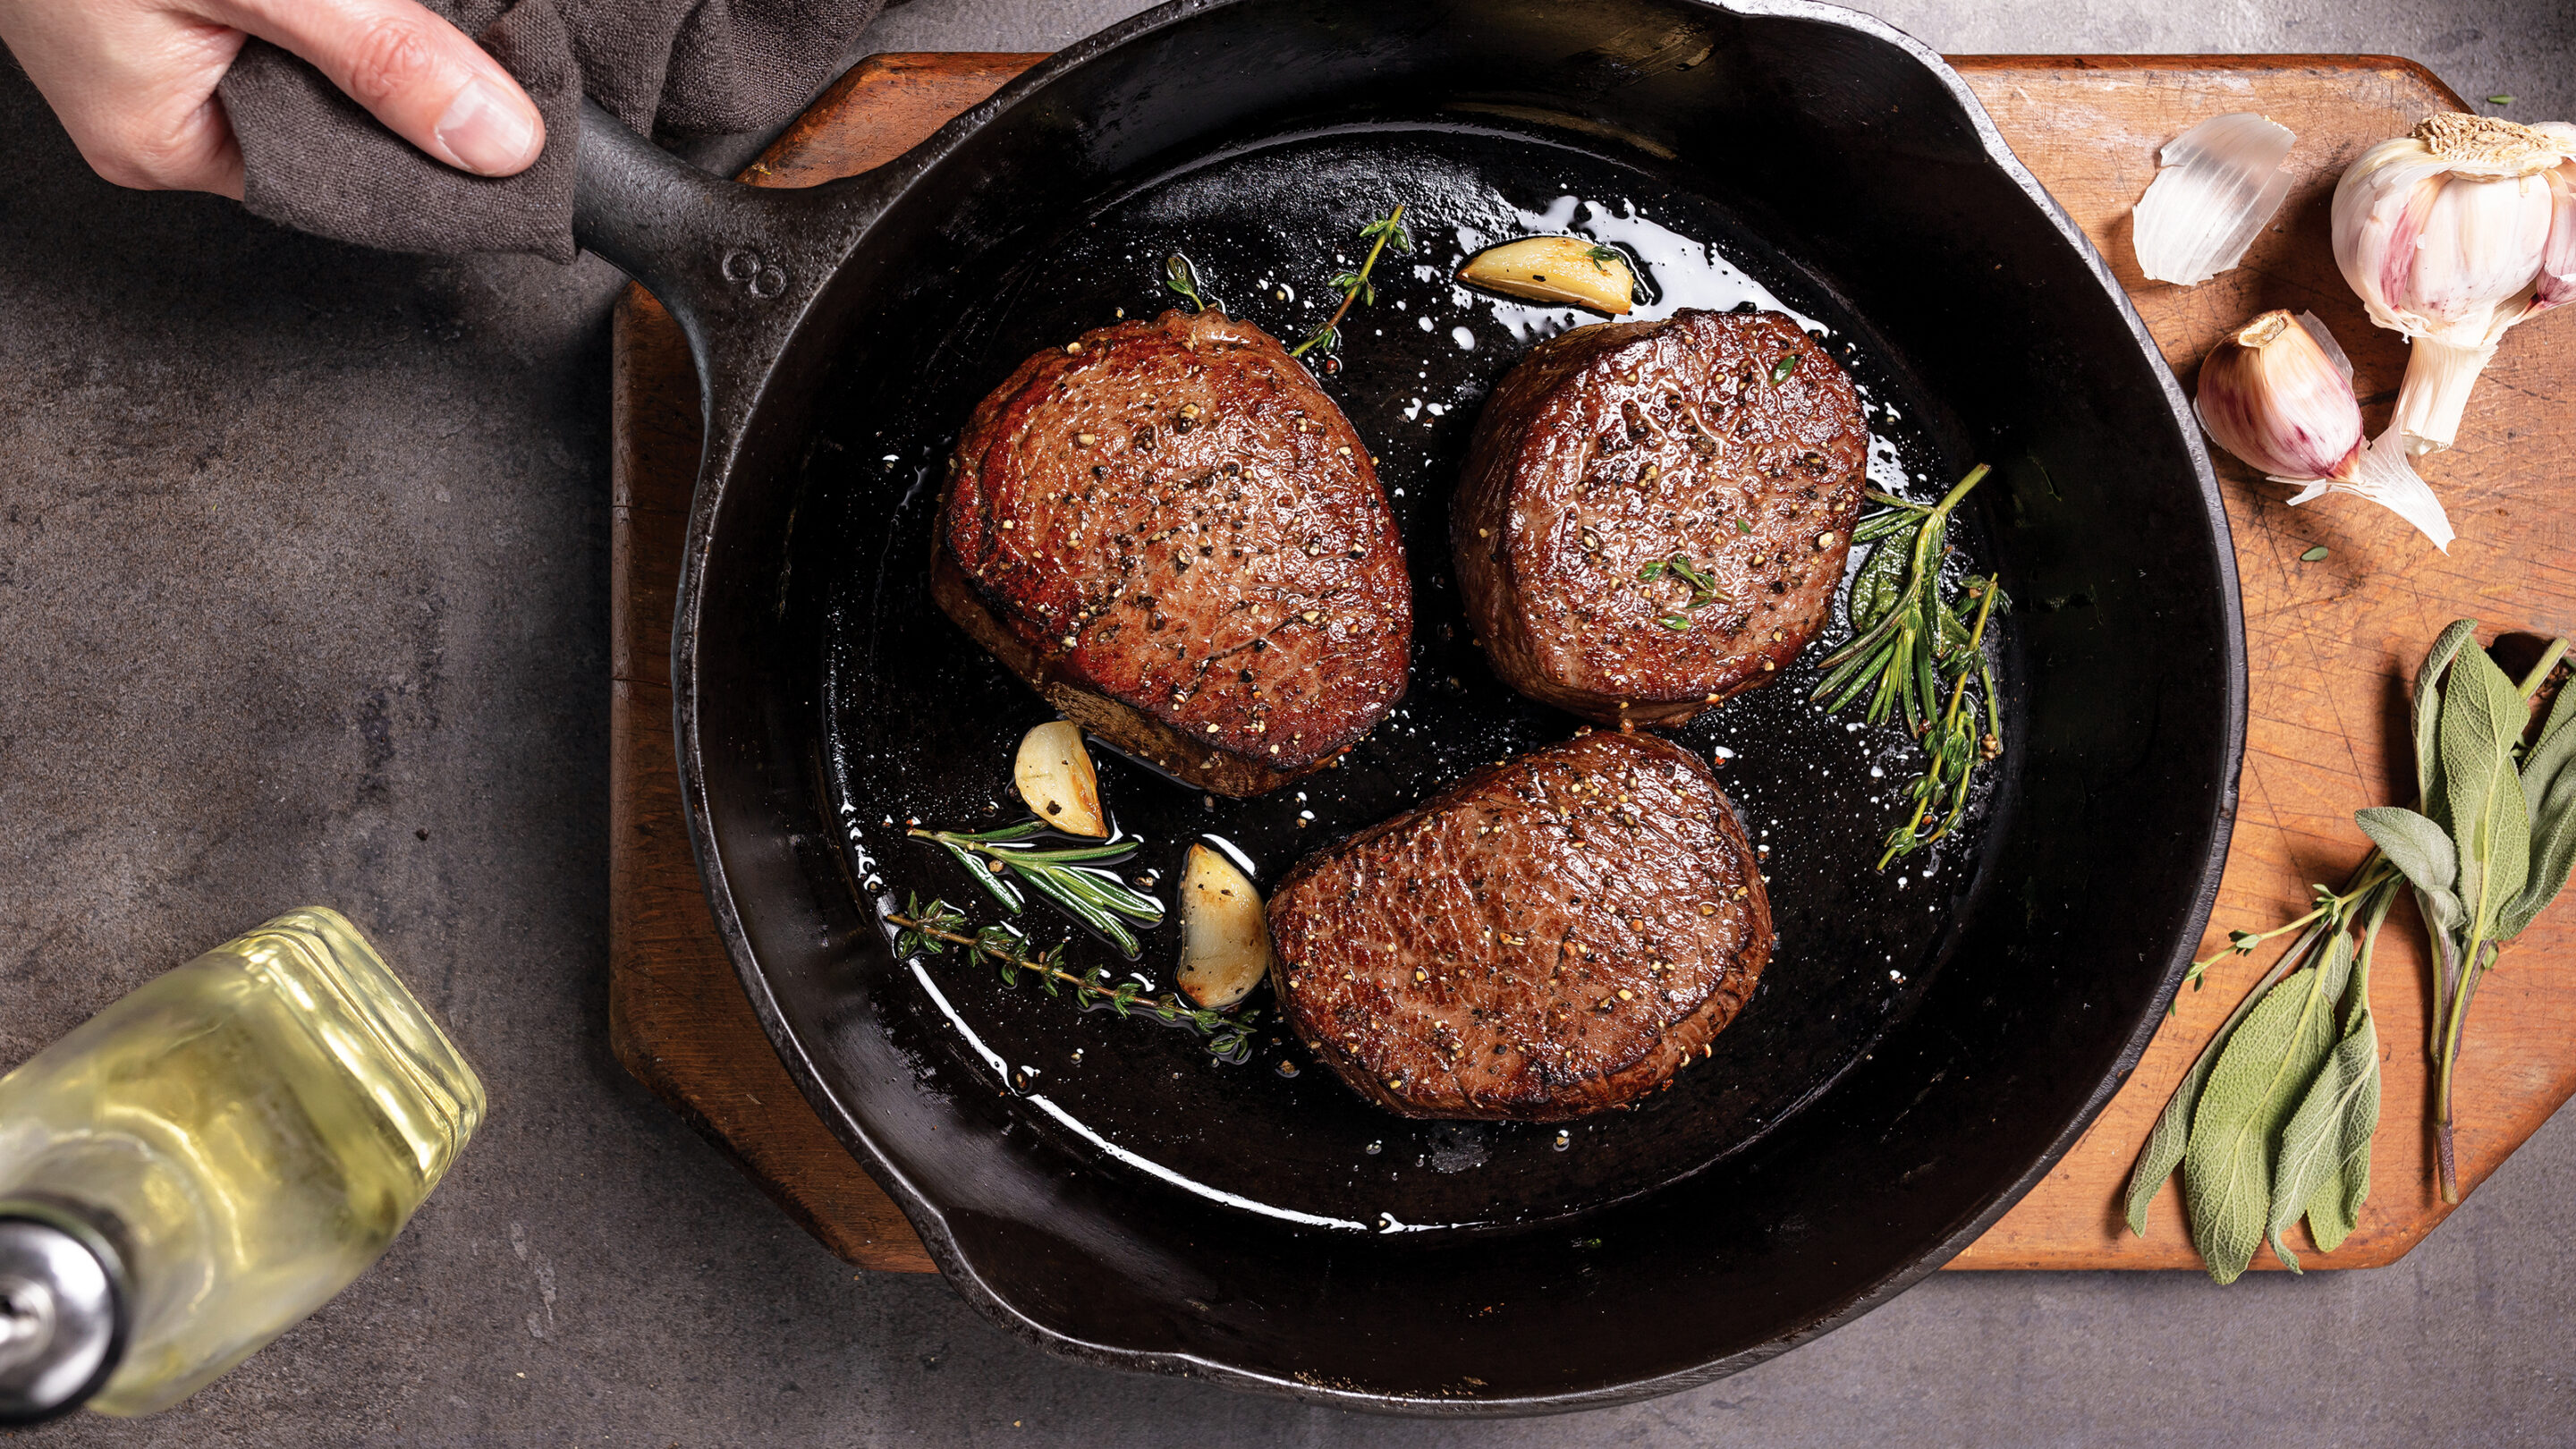 https://blog-content.omahasteaks.com/wp-content/uploads/2022/06/blogwp_your-local-steakhouse-does-not-want-you-to-read-this-scaled-1.jpg